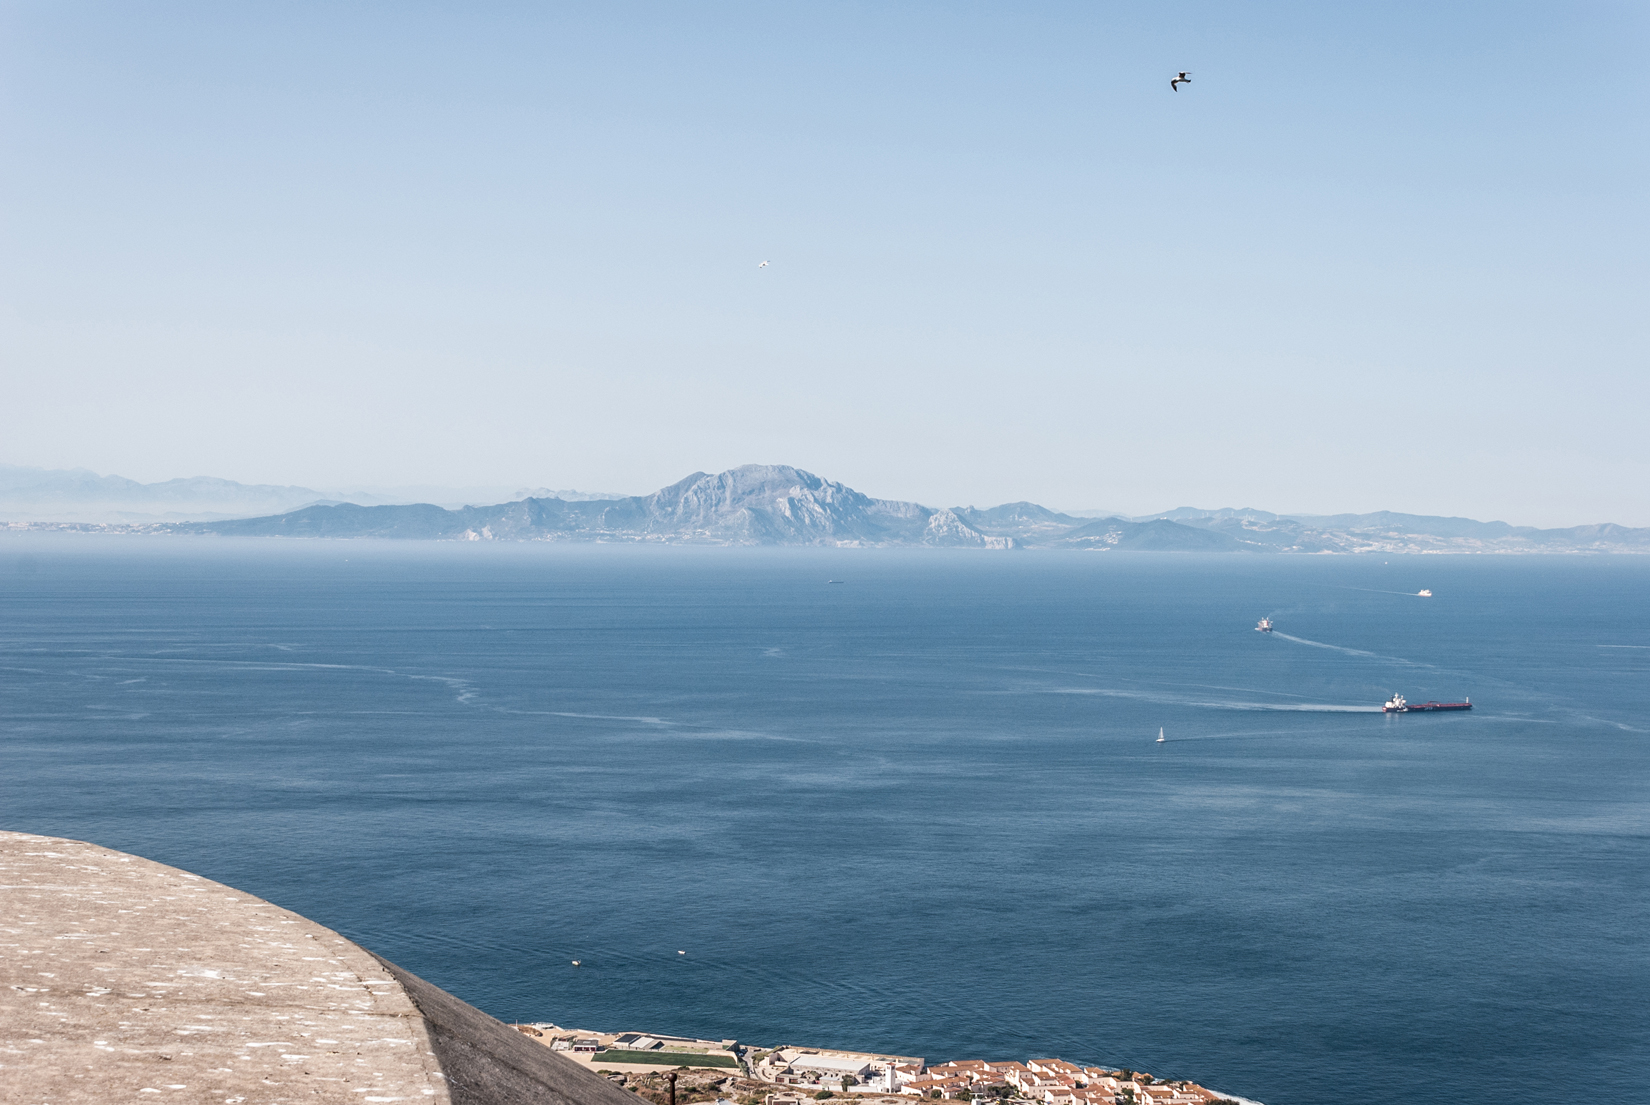 Across the water is the Spanish city of Ceuta which shares a western border with Morocco, North Africa